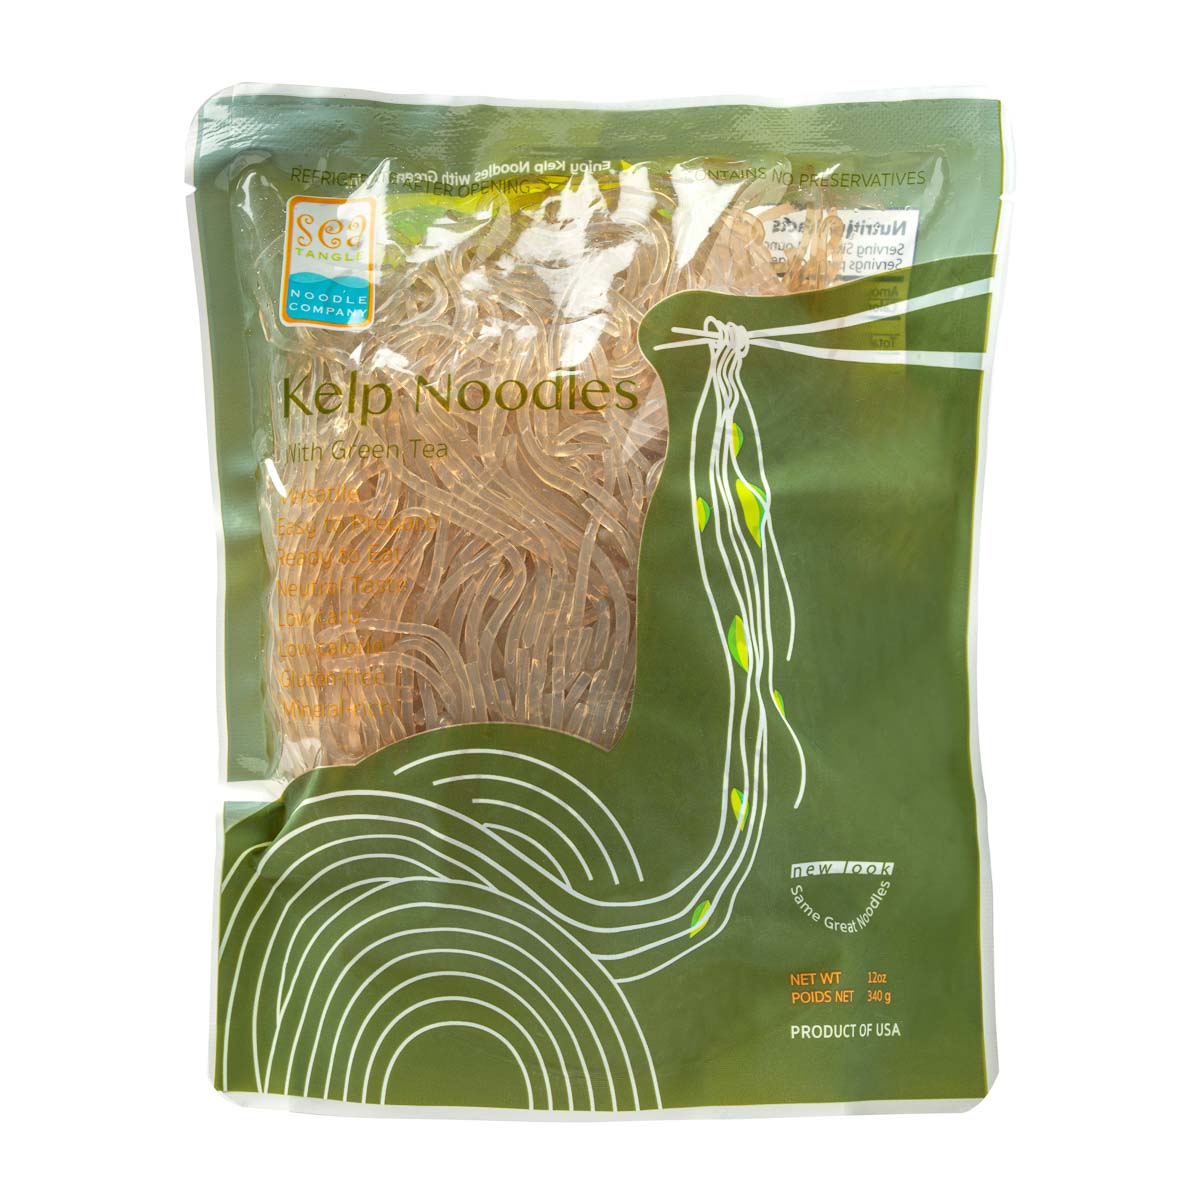 Kelp Noodles with Green Tea | Sea Tangle | Raw Living UK | Sea Vegetables | Sea Tangle Kelp Noodles with Green Tea look and taste like Chinese glass noodles. Kelp is a nutritious Sea Vegetable &amp; these Noodles are fun to prepare and eat!